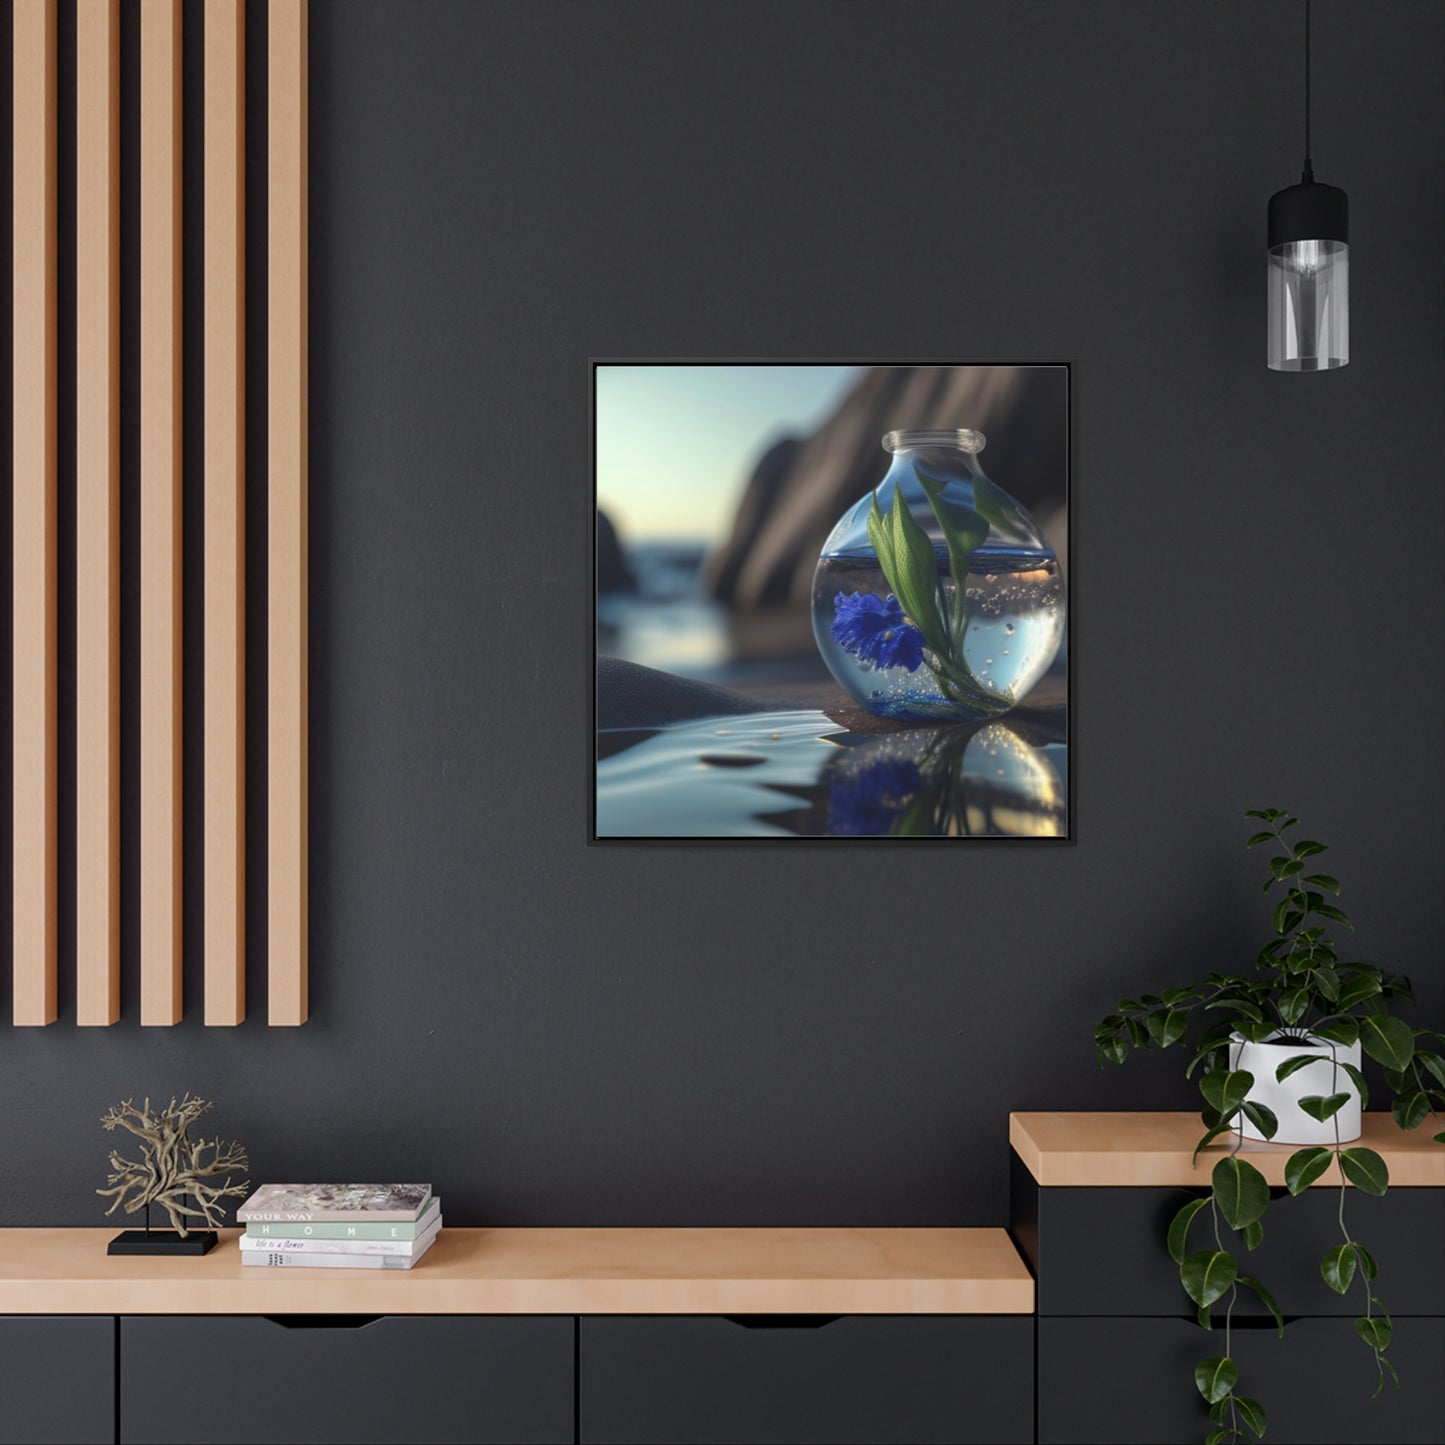 Gallery Canvas Wraps, Square Frame The Bluebell 3